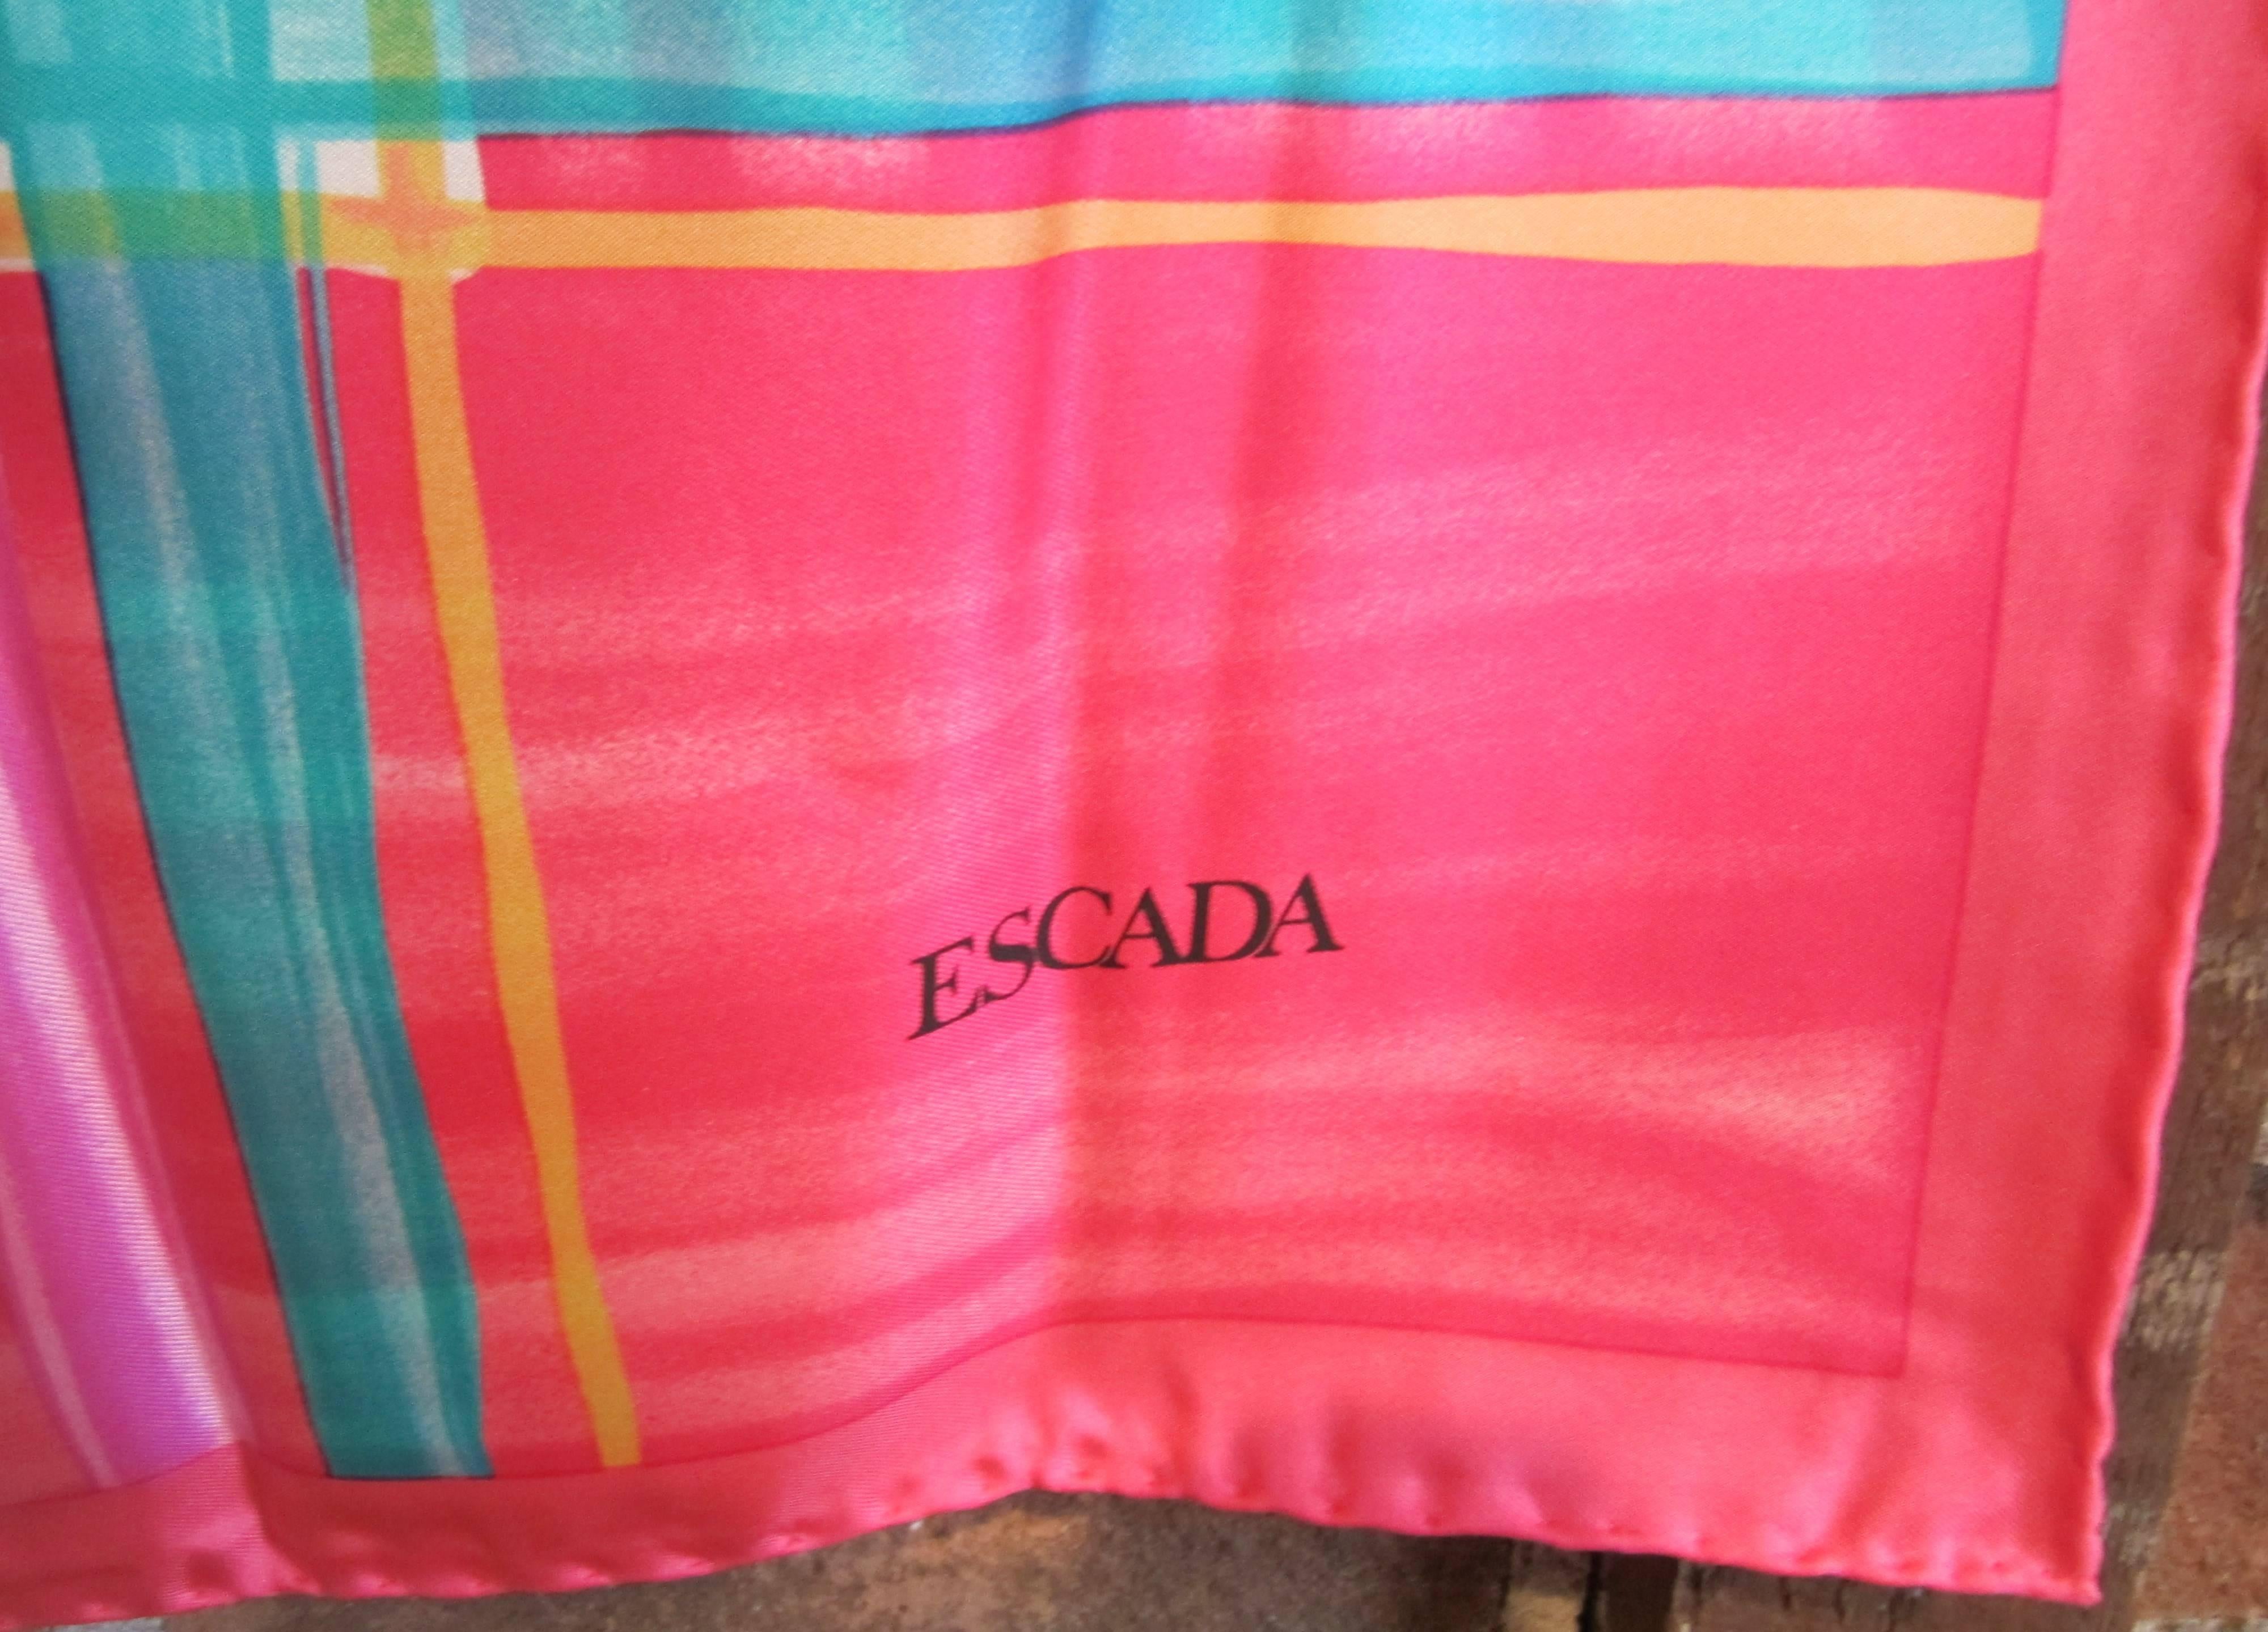  Escada Silk Scarf Pink Teal Yellow Purple Made in Italy 1990s New, Never Worn In New Condition For Sale In Wallkill, NY